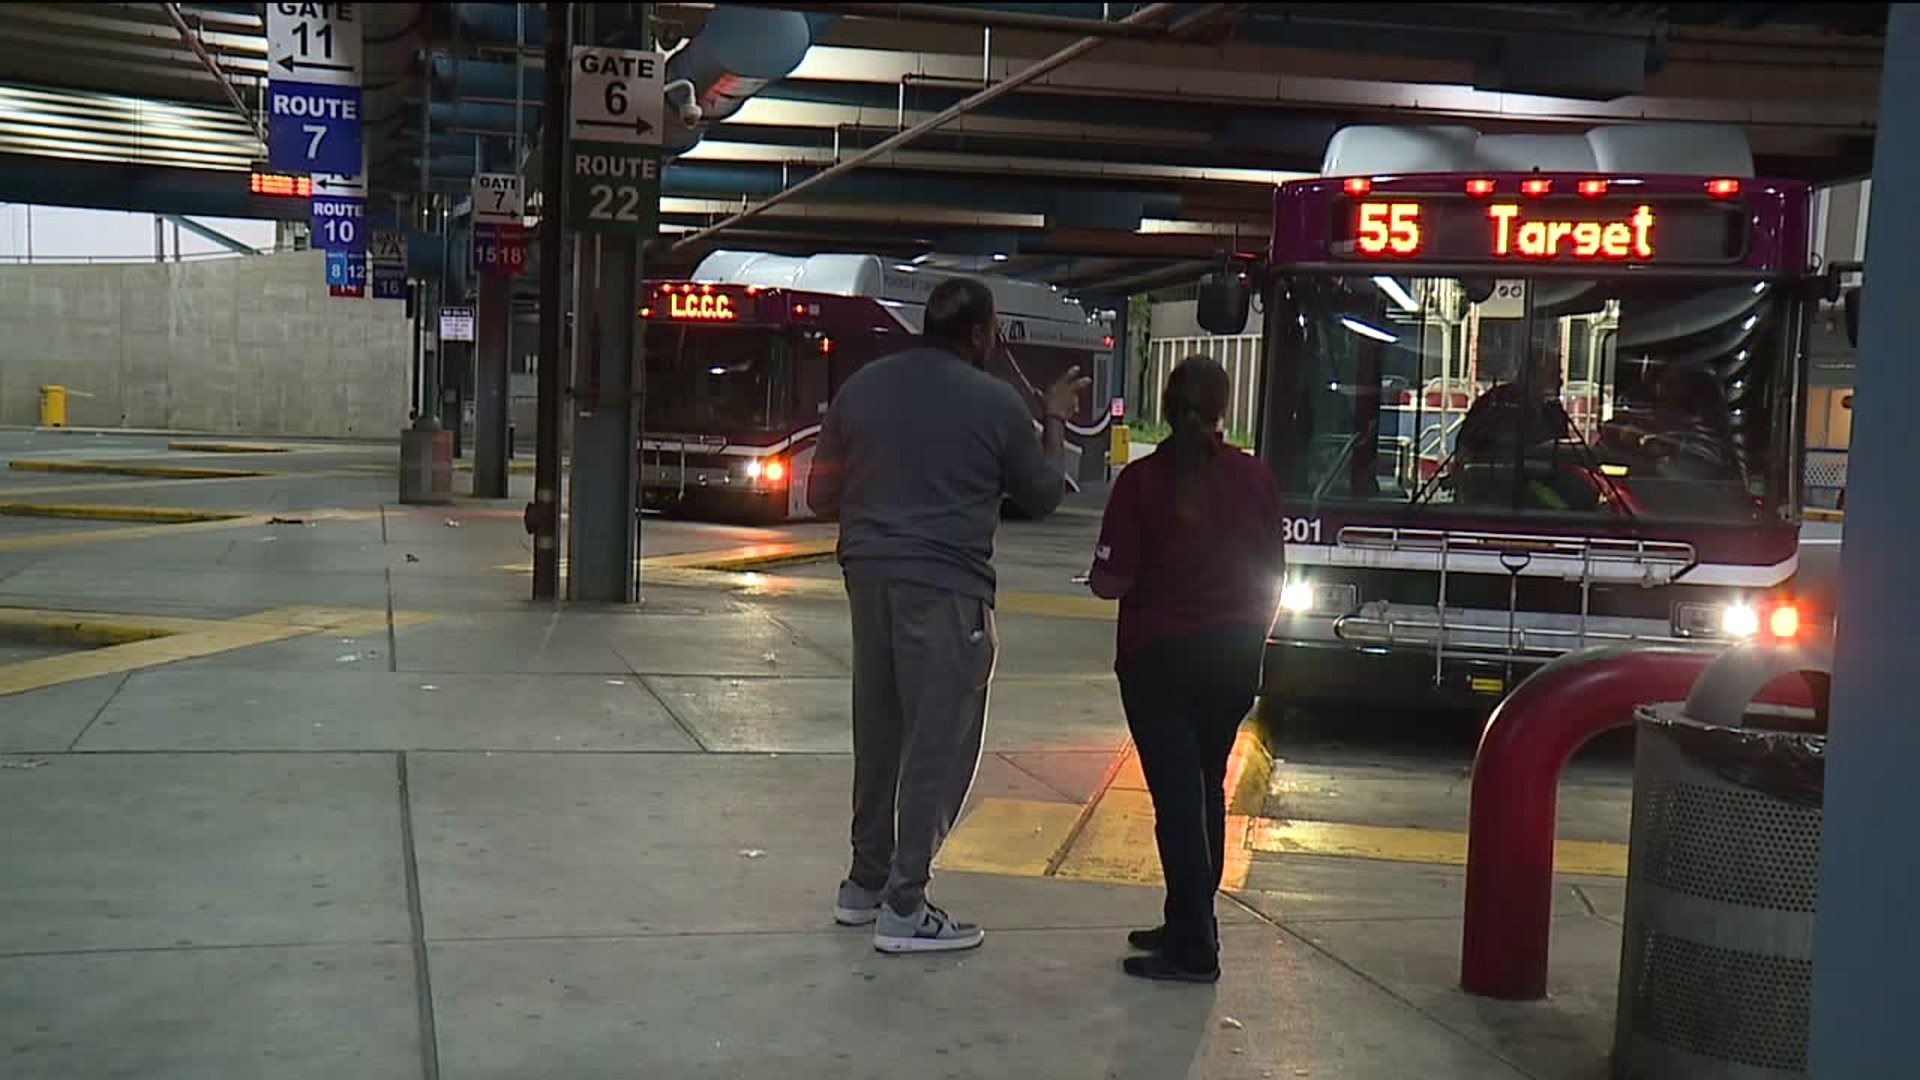 Riders "Ecstatic" Over New Night Bus Schedule in Luzerne County